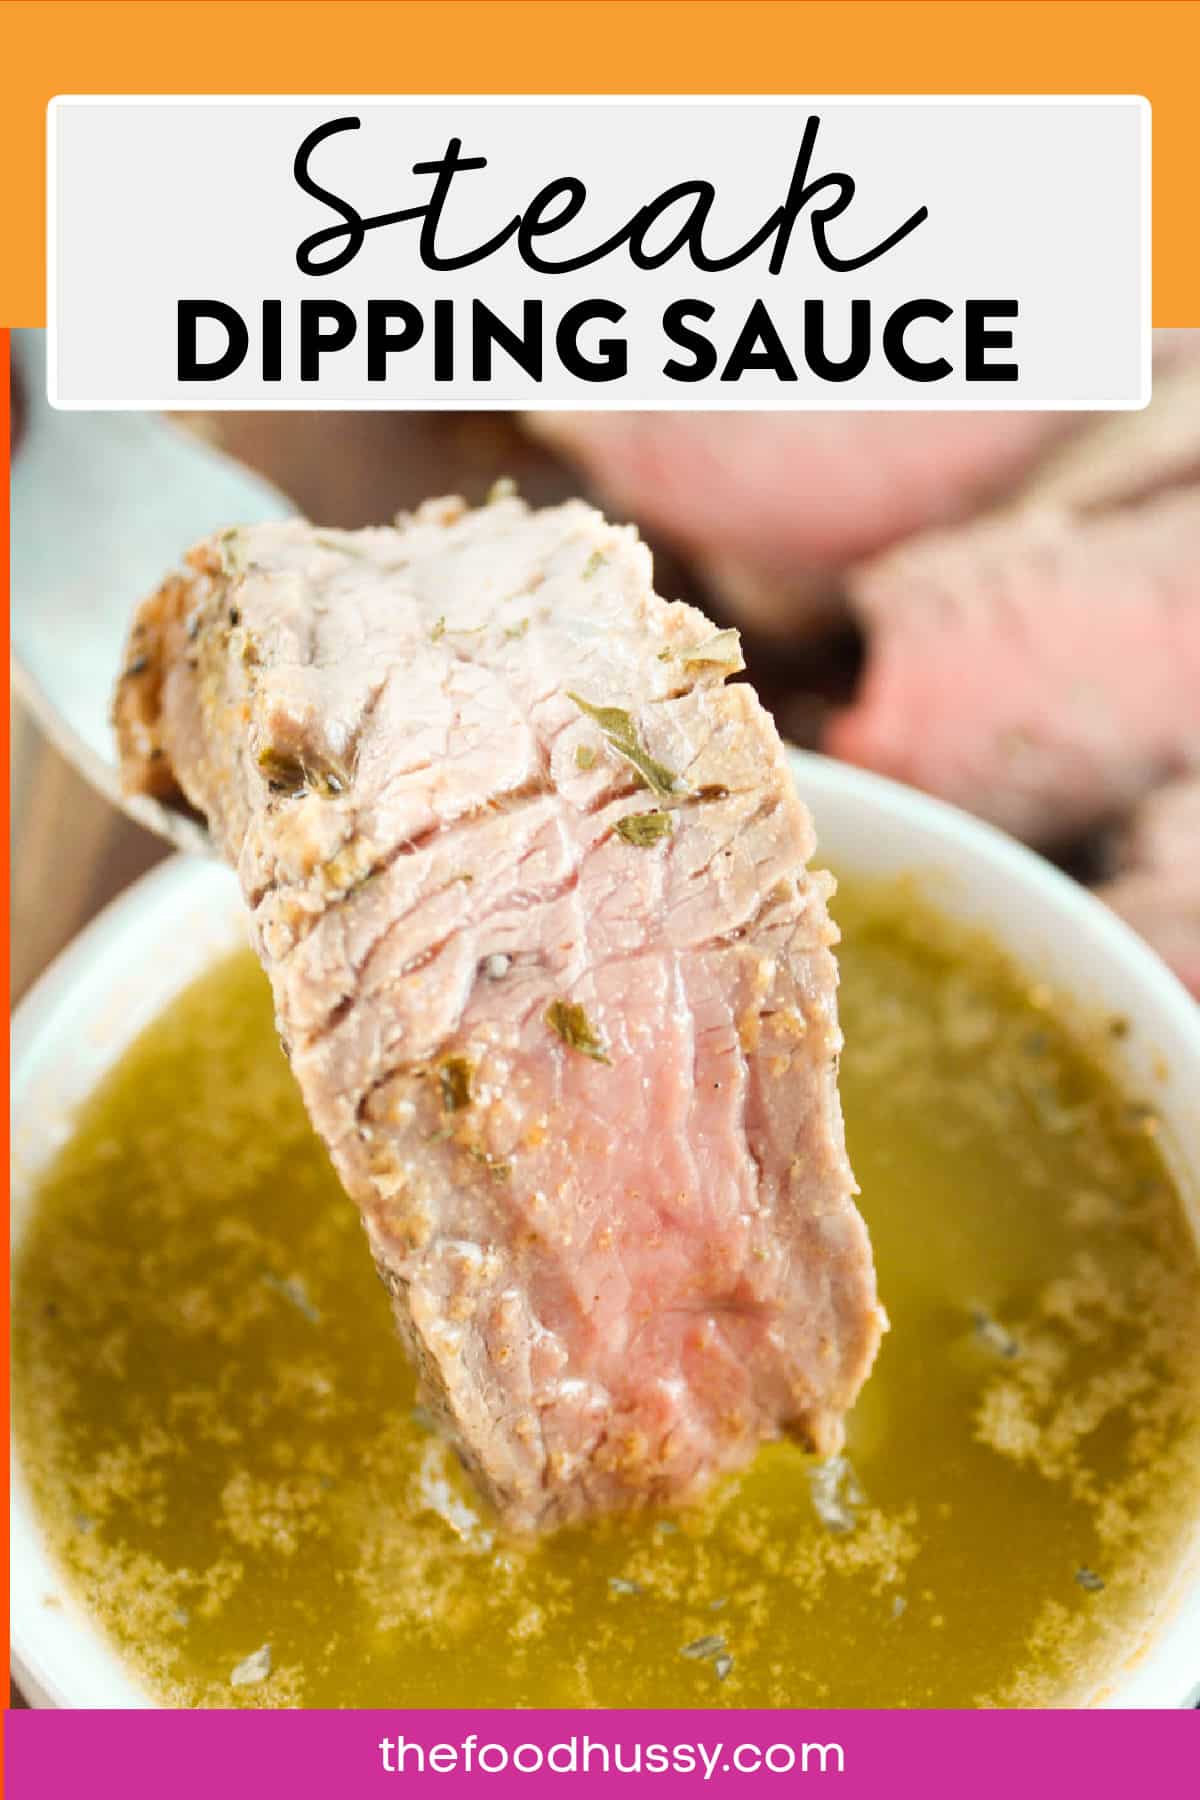 This Steak Dipping Sauce recipe is so simple to make and it is a great complement to any steak dinner! A rich butter sauce with Dijon mustard, Worcestershire sauce and lots of herbs & spices. Also known as Cowboy Butter Dipping Sauce, you'll want this every time you make steak! via @foodhussy